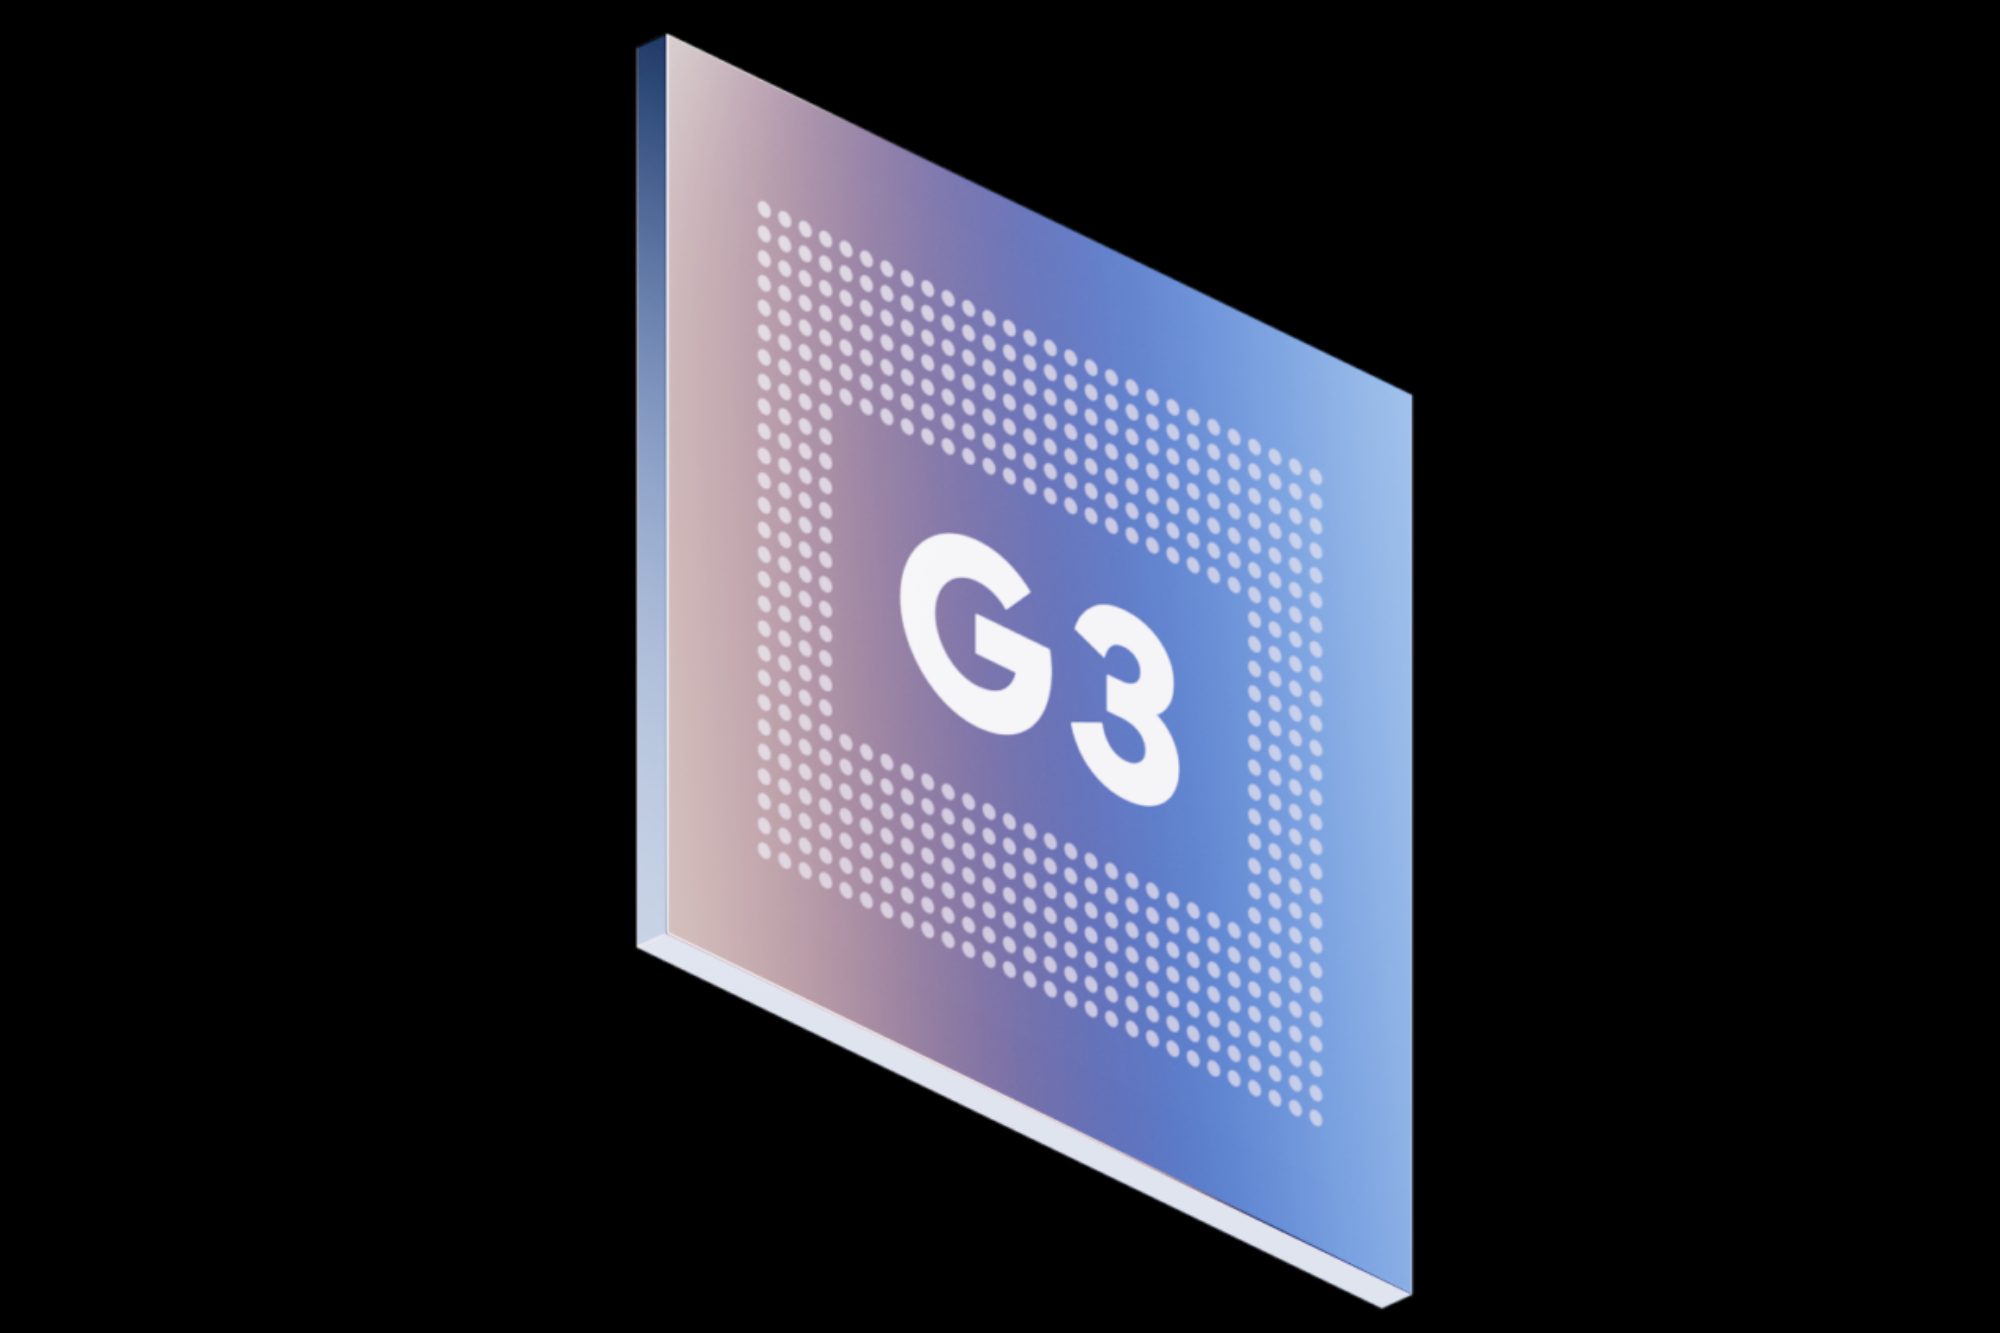 Official product render of Google's Tensor G3 chip.